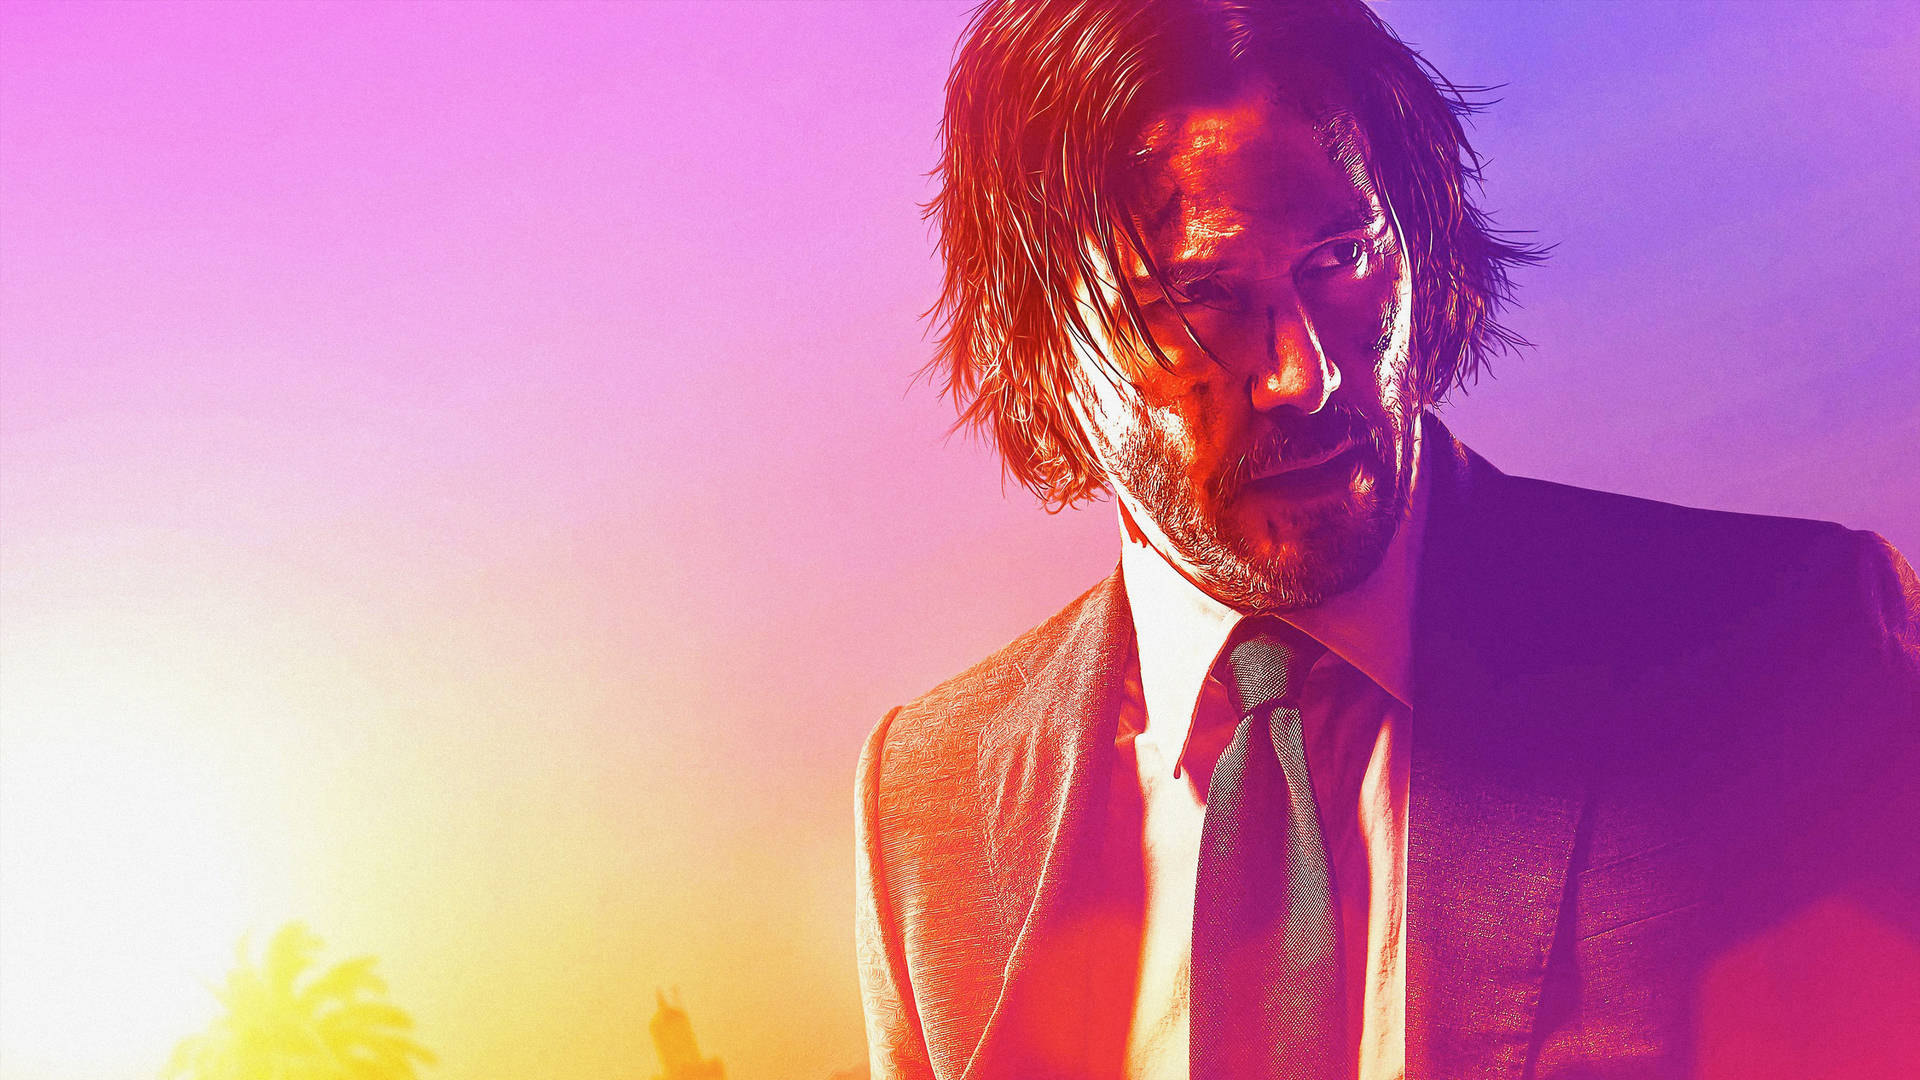 John Wick 8255X4643 Wallpaper and Background Image